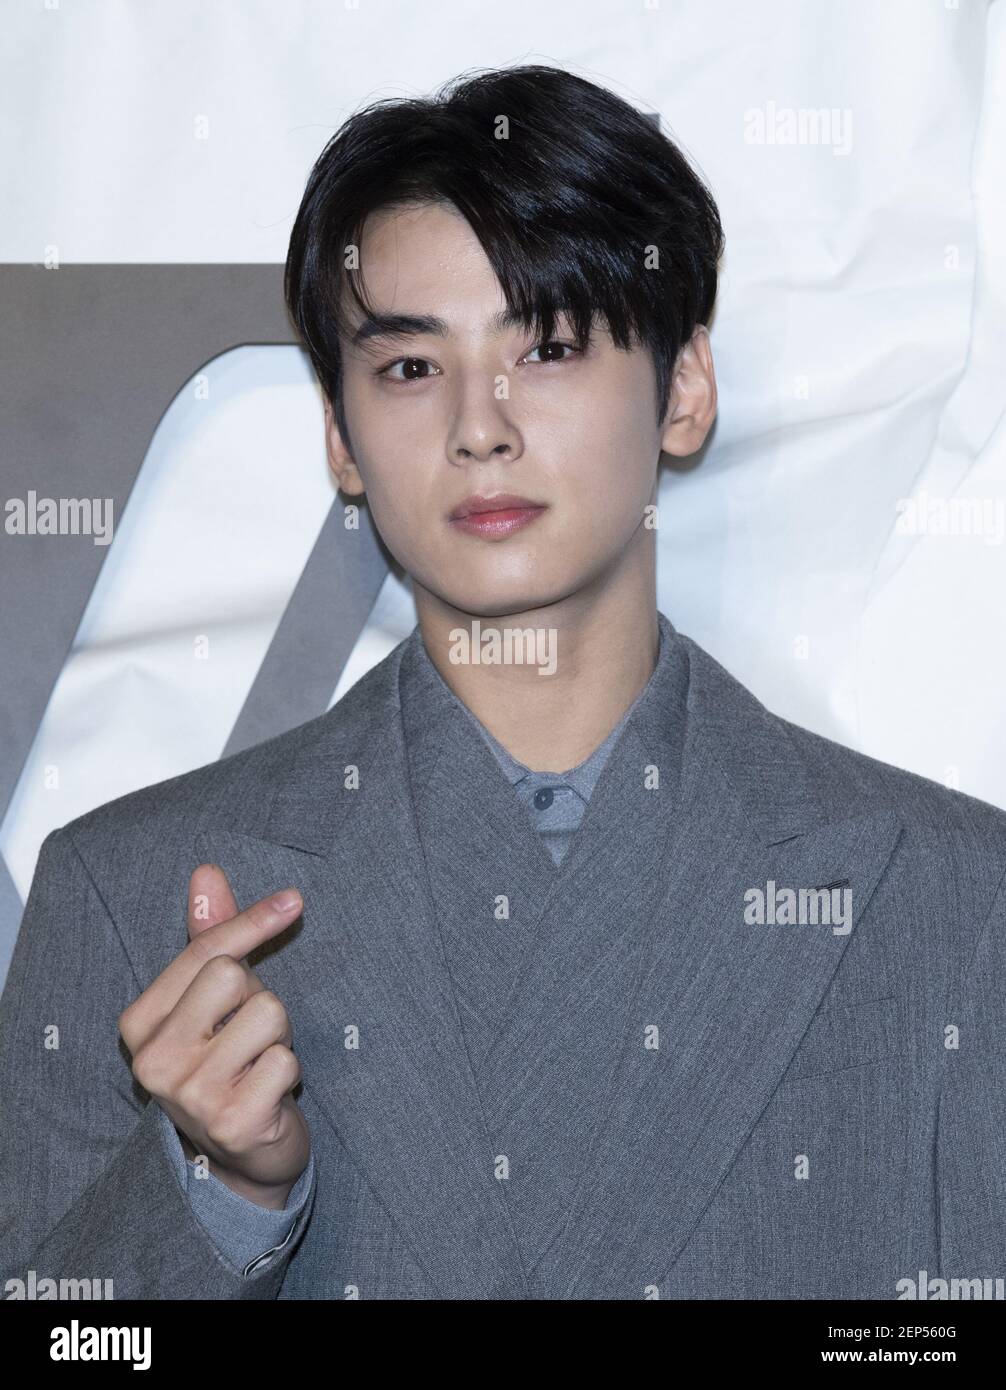 South Korean actor and singer Cha Eun-woo, member of South Korean boy group  Astro, attends a photo call for the Louis Vuitton launching at Louis  Vuitton Seoul in Seoul, South Korea on